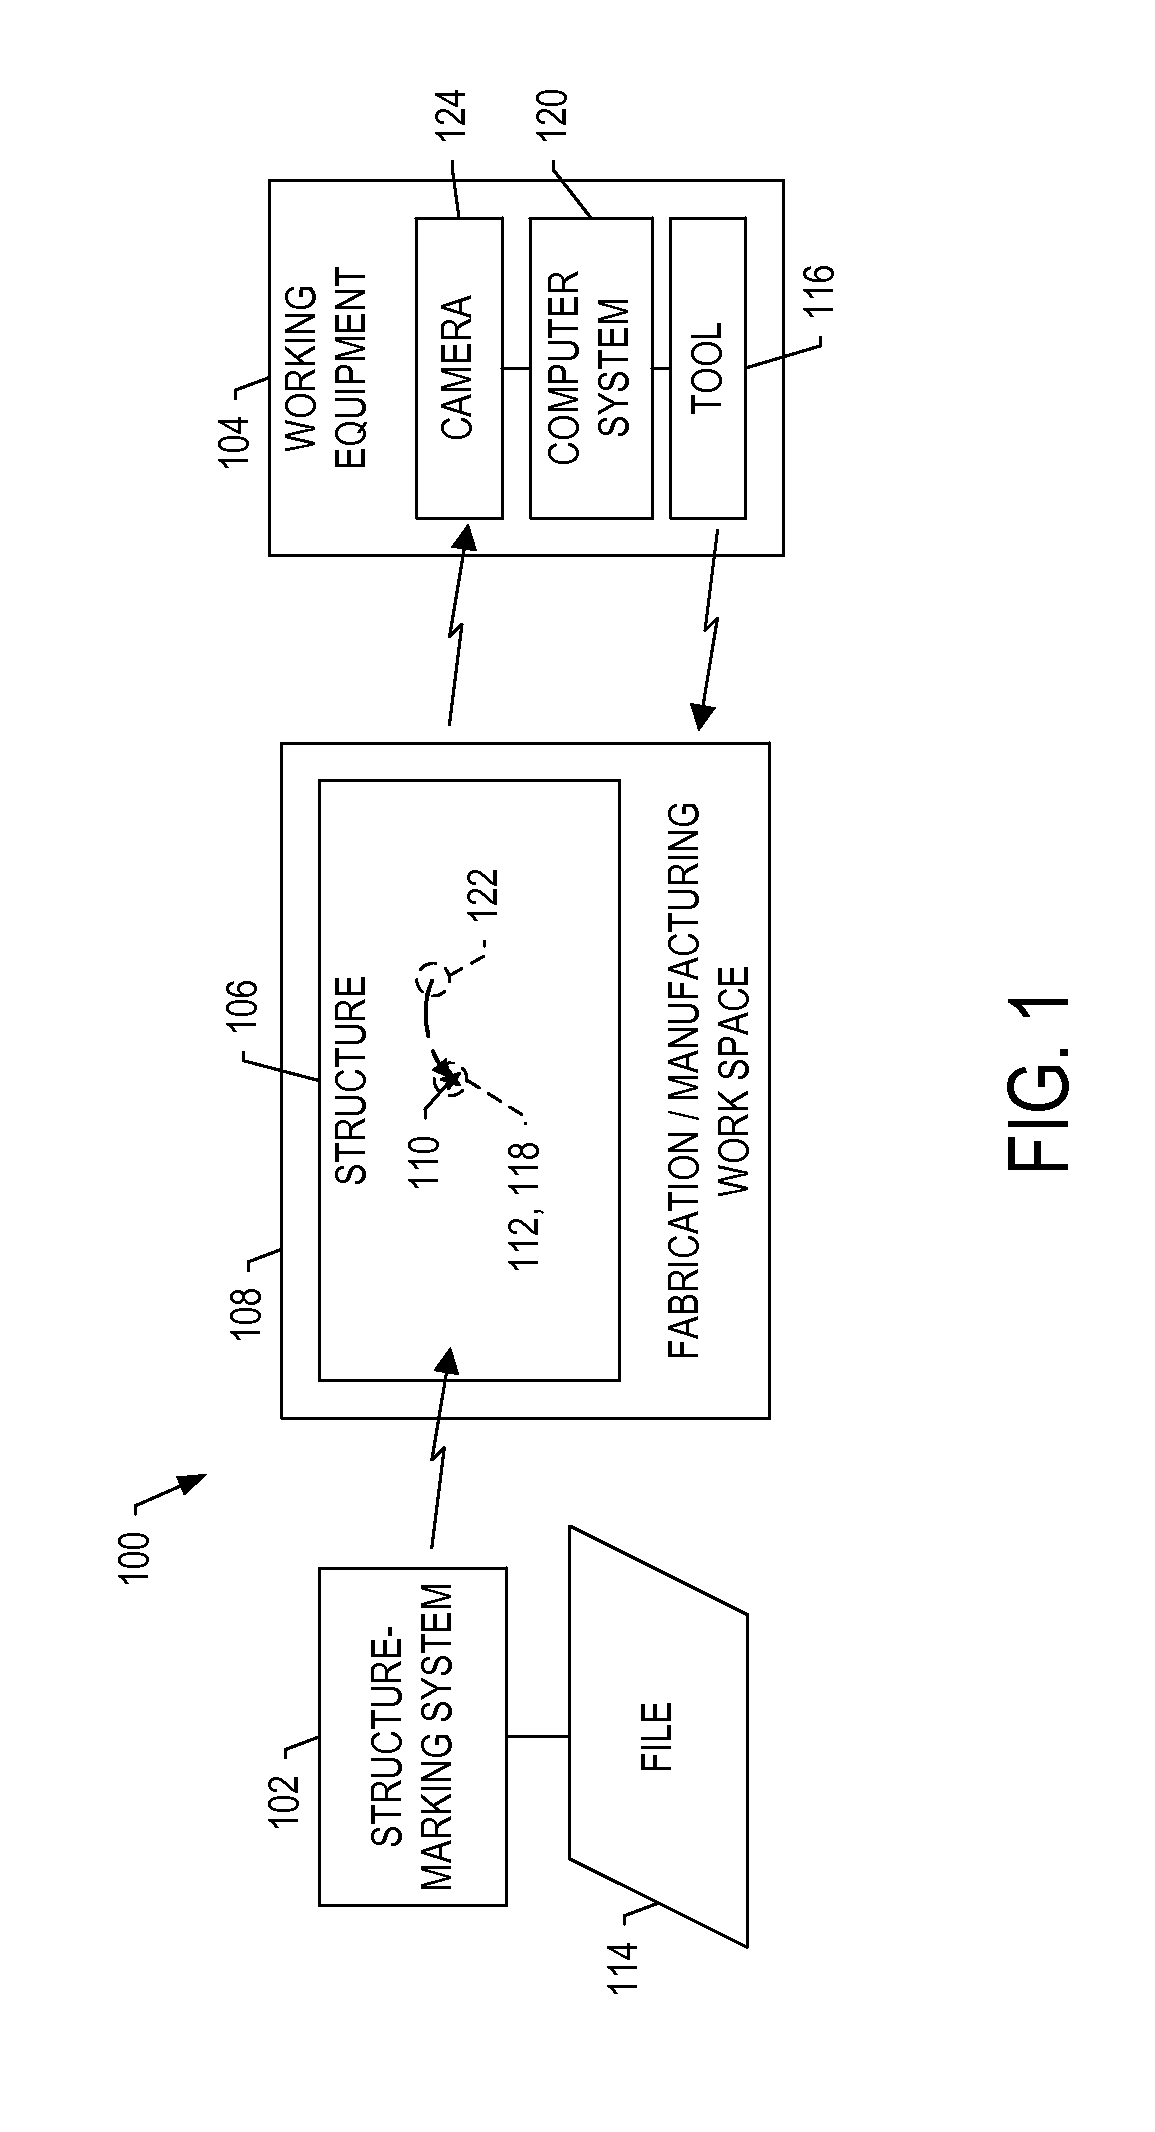 Apparatuses and methods for accurate structure marking and marking-assisted structure locating